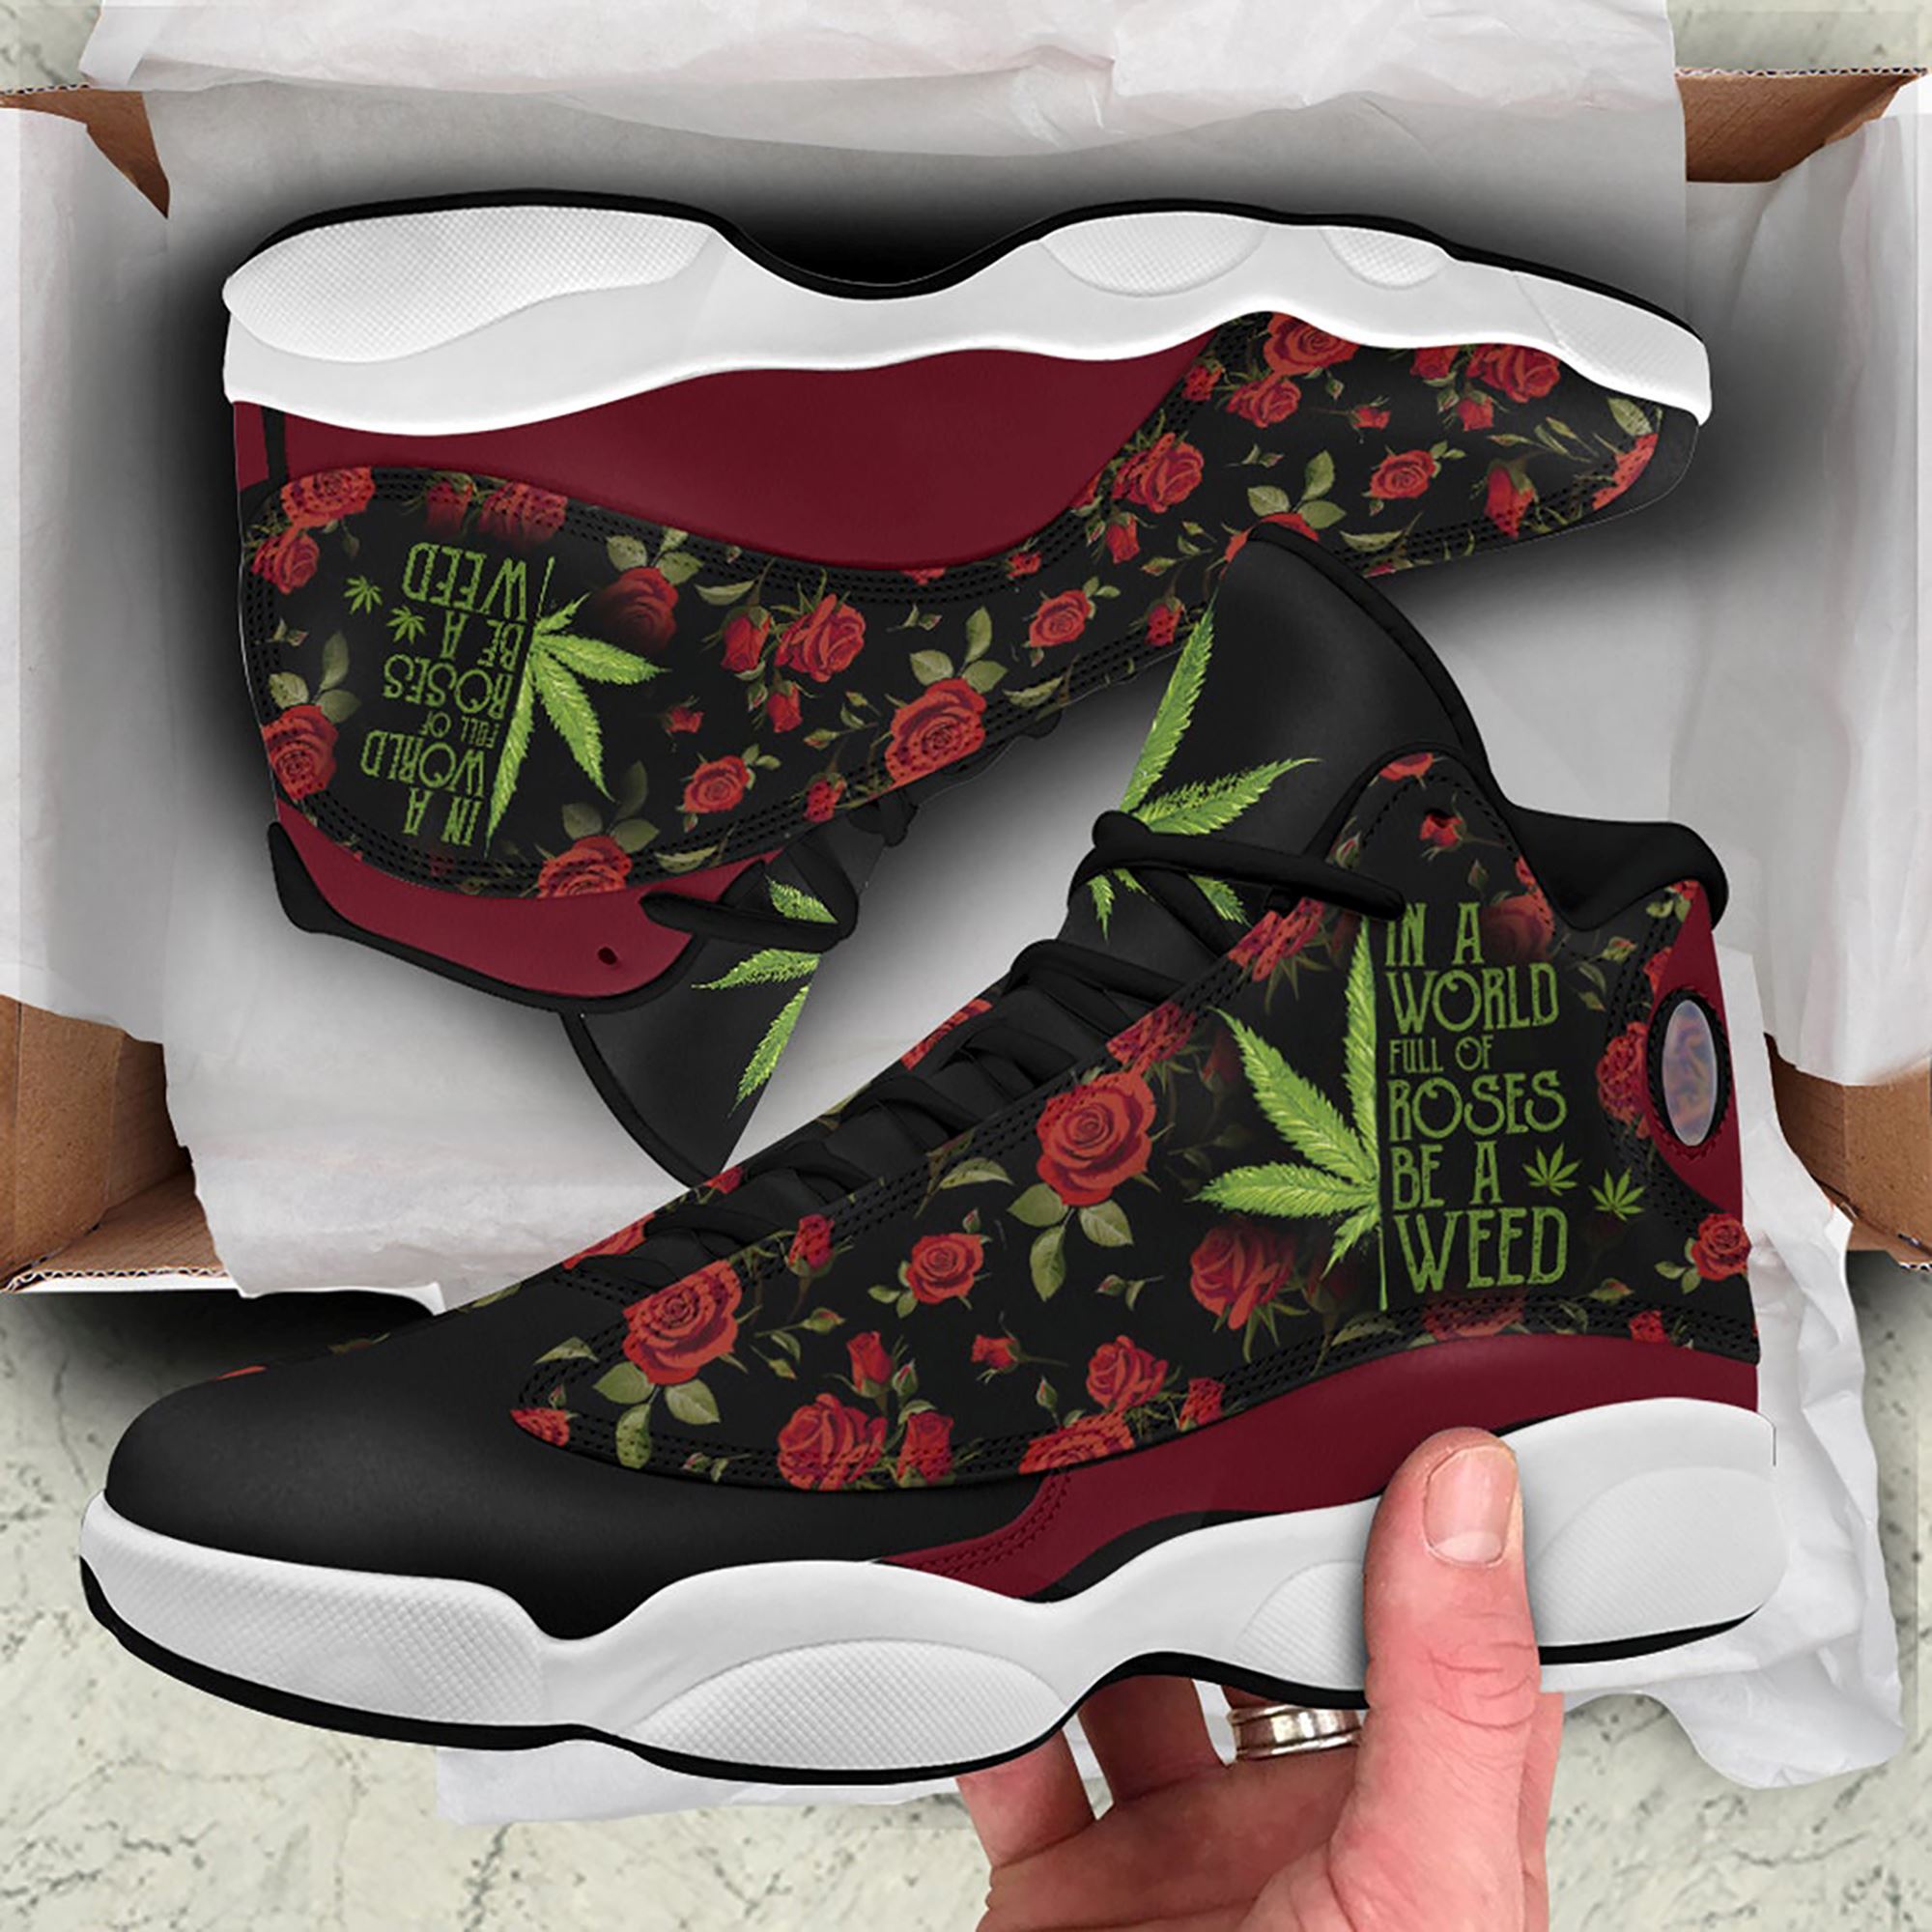 Rose Weed Air Jordan 13 Sneakers Shoes For Men And Women Air Jd13 Shoes Cannabis Psychedelic Marijuana Lover